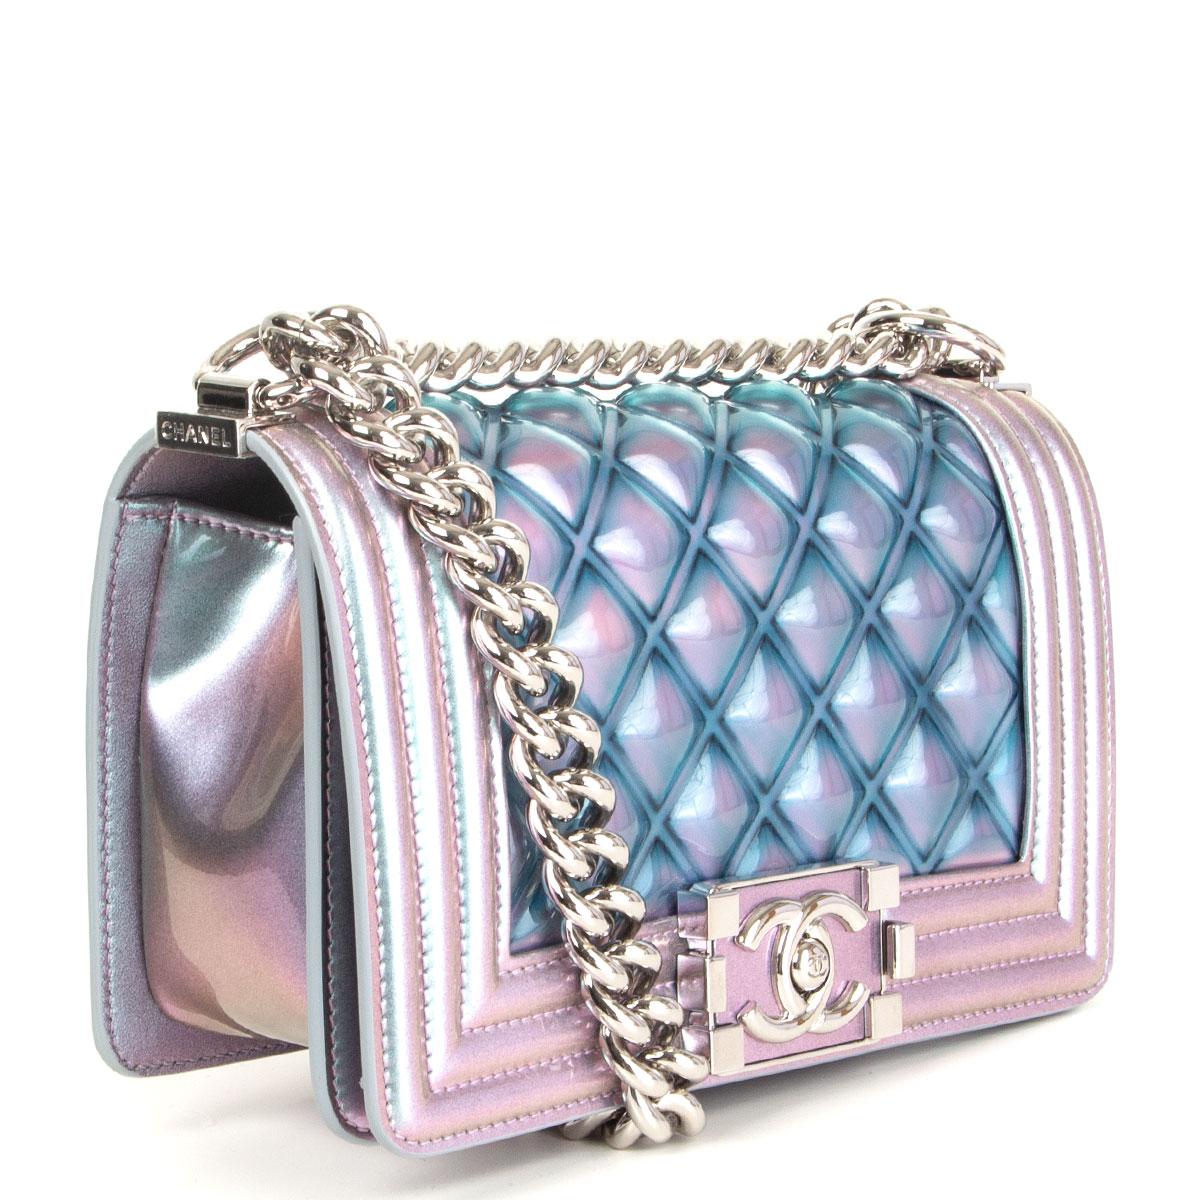 Chanel 'Water Boy Small' shoulder bag in iridescent light purple, blue and light turquoise PVC and patent calfskin featuring silver-tone chunky chain link. Limited edition from the spring/summer 2018 runway. Opens with a front flap and the Boy